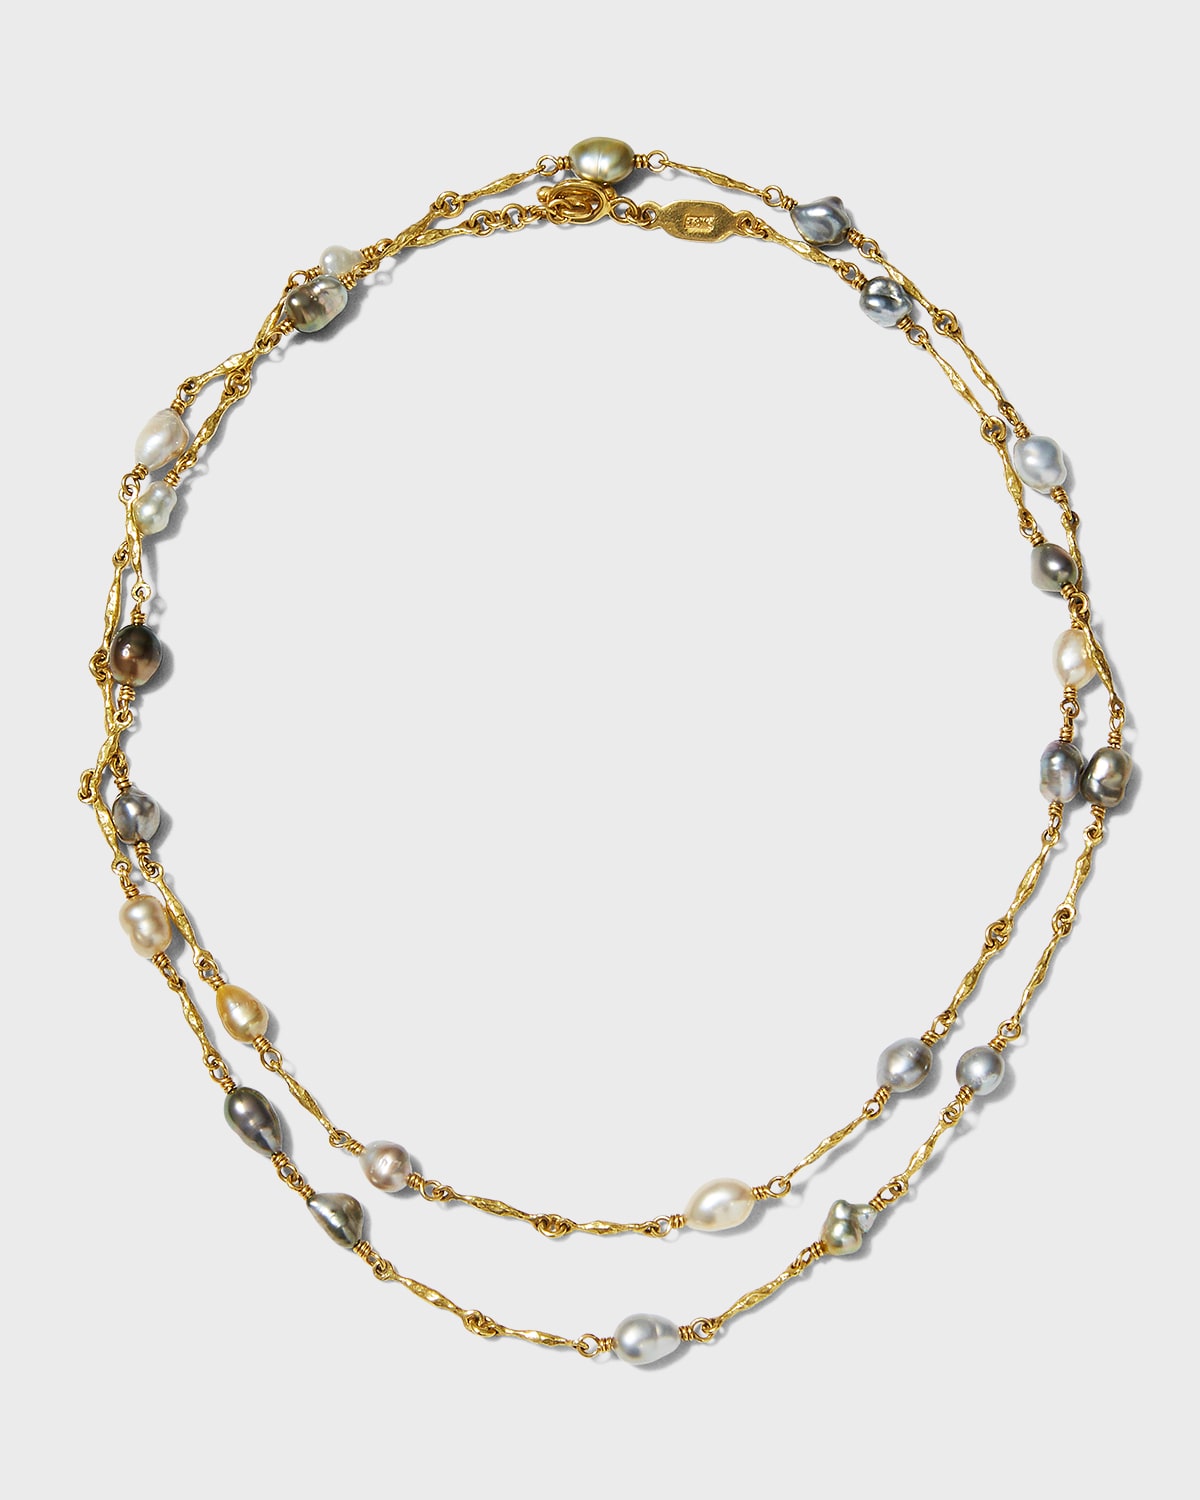 Lee Brevard Old Money Keshi Pearl-Link Chain Necklace, 31"L